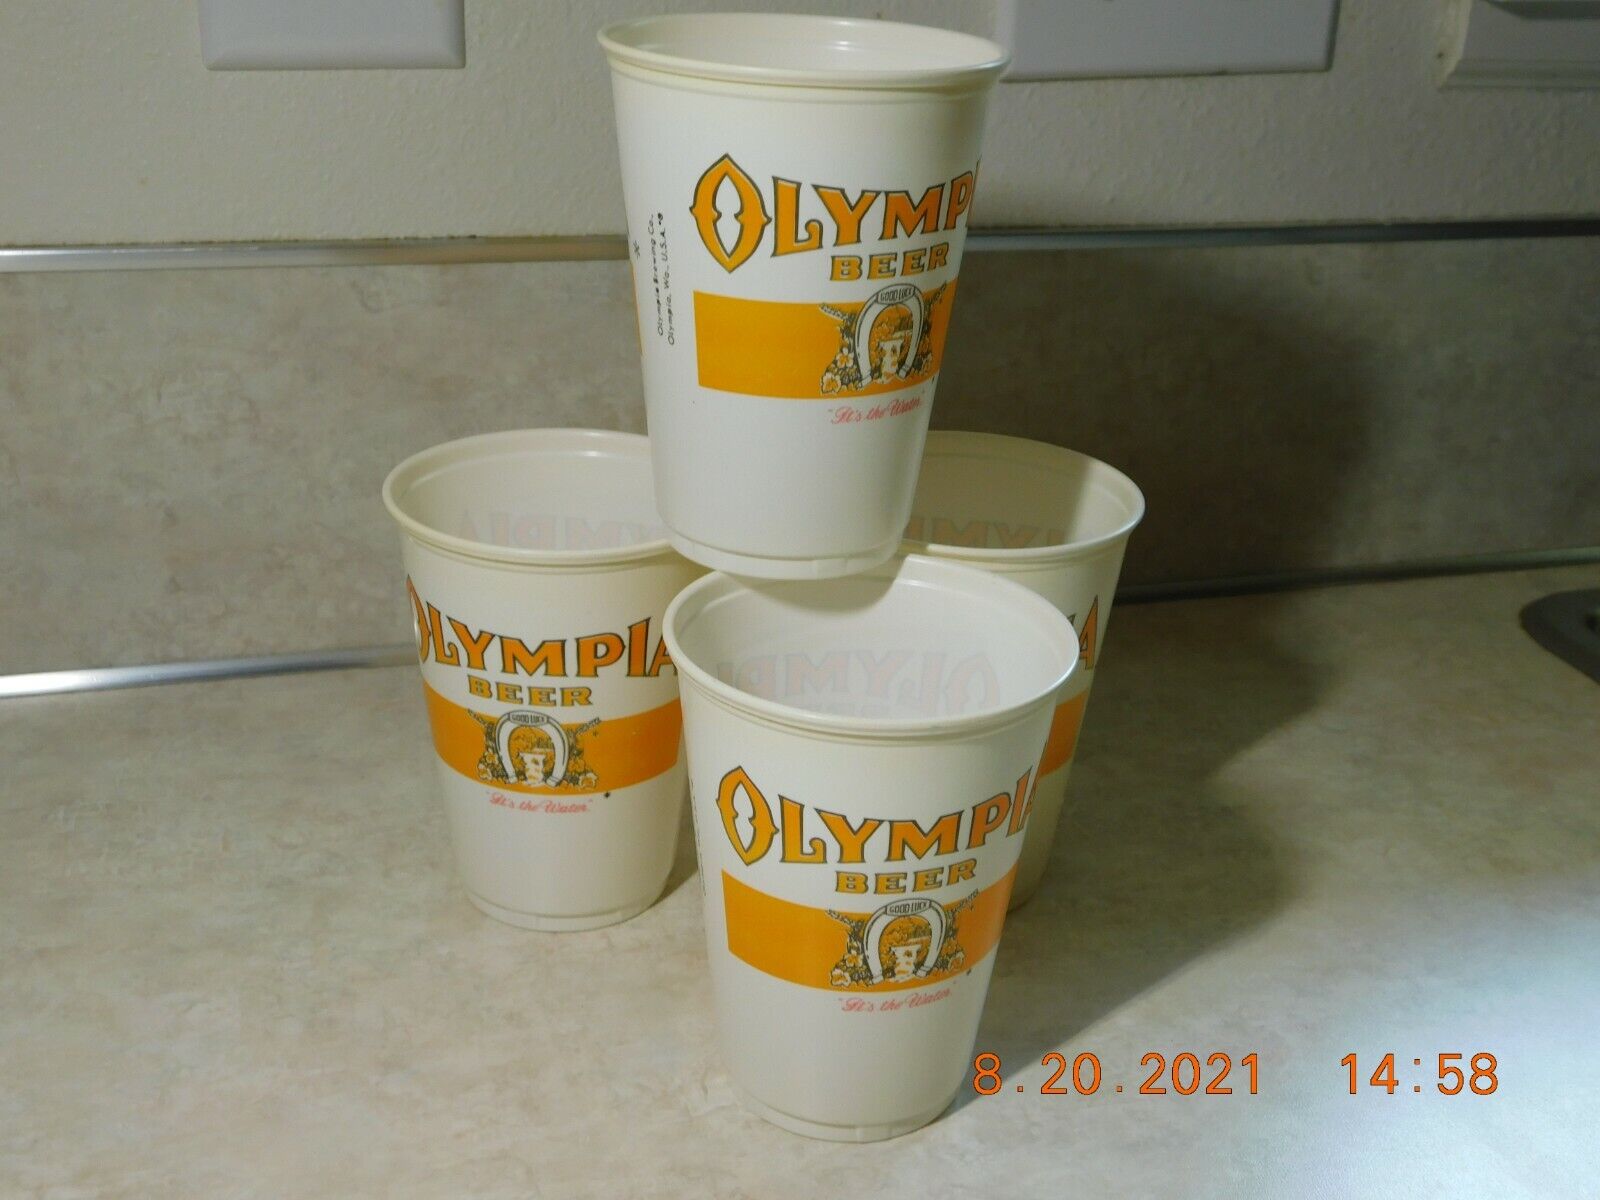 70's 80's OLYMPIA BEER Keg "It's the Water" Cups 12 oz SOLO NEW Unused  Без бренда - фотография #3